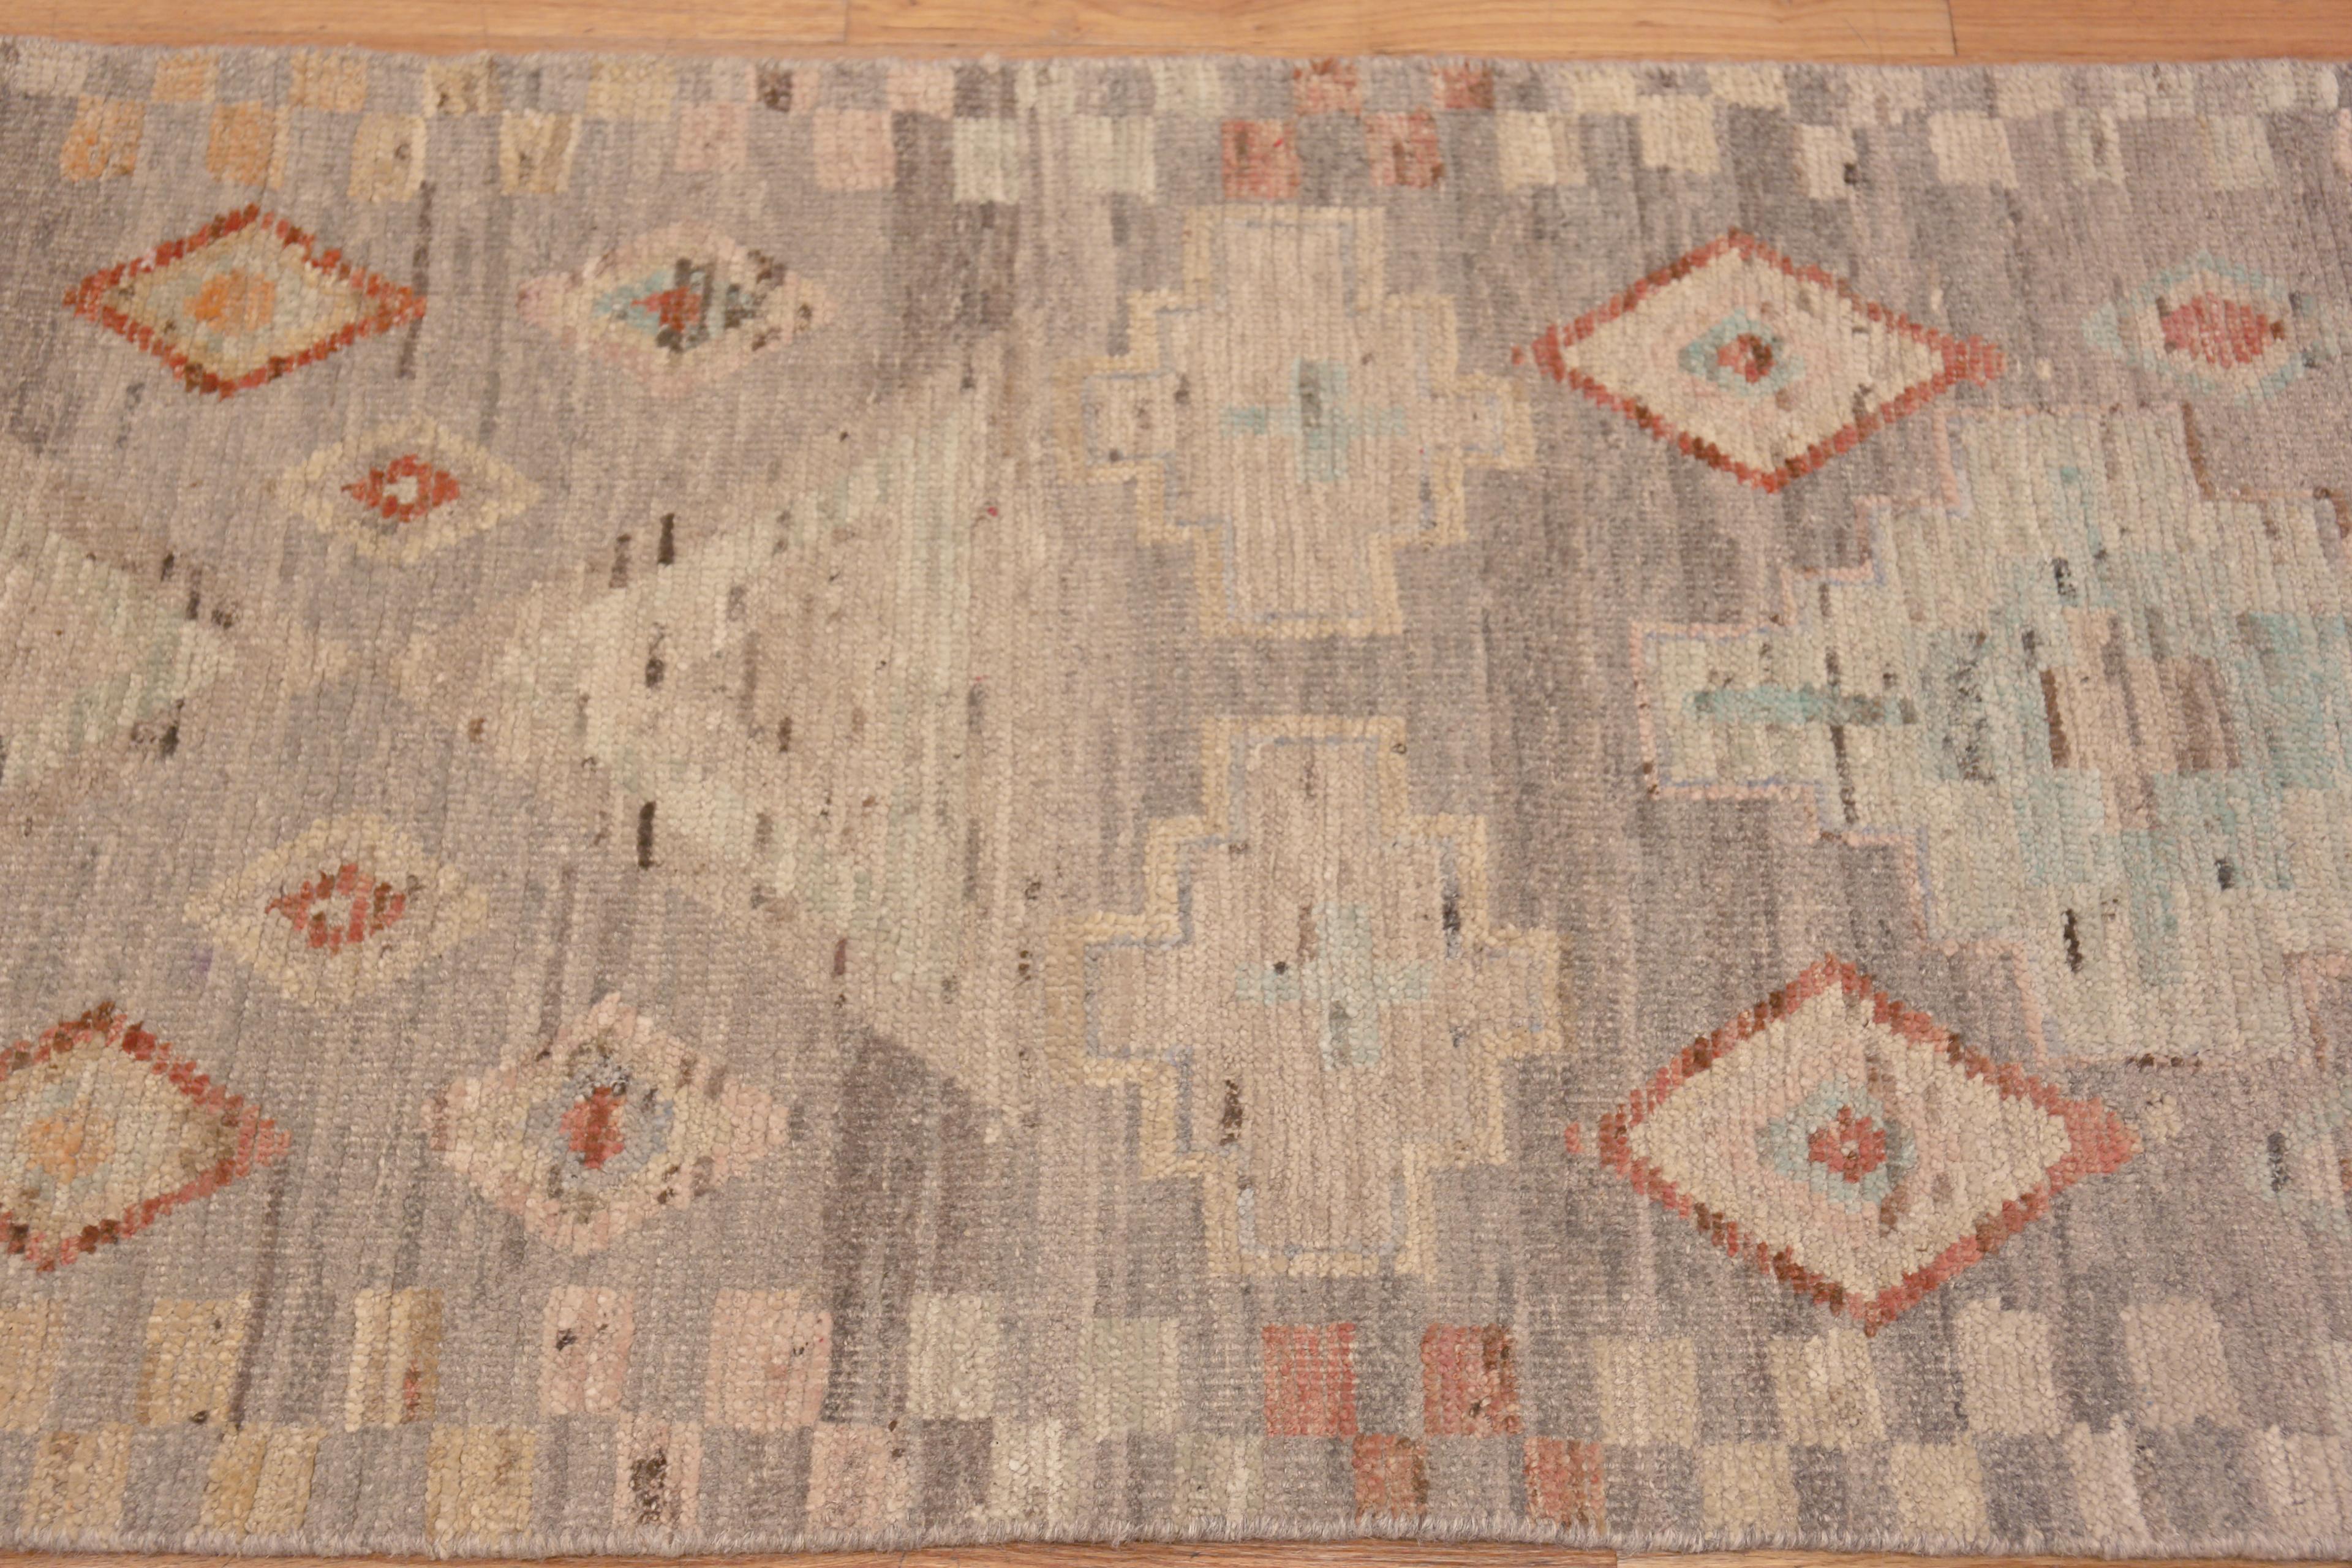 Contemporary Nazmiyal Collection Rustic Tribal Design Hallway Runner Rug 2'8